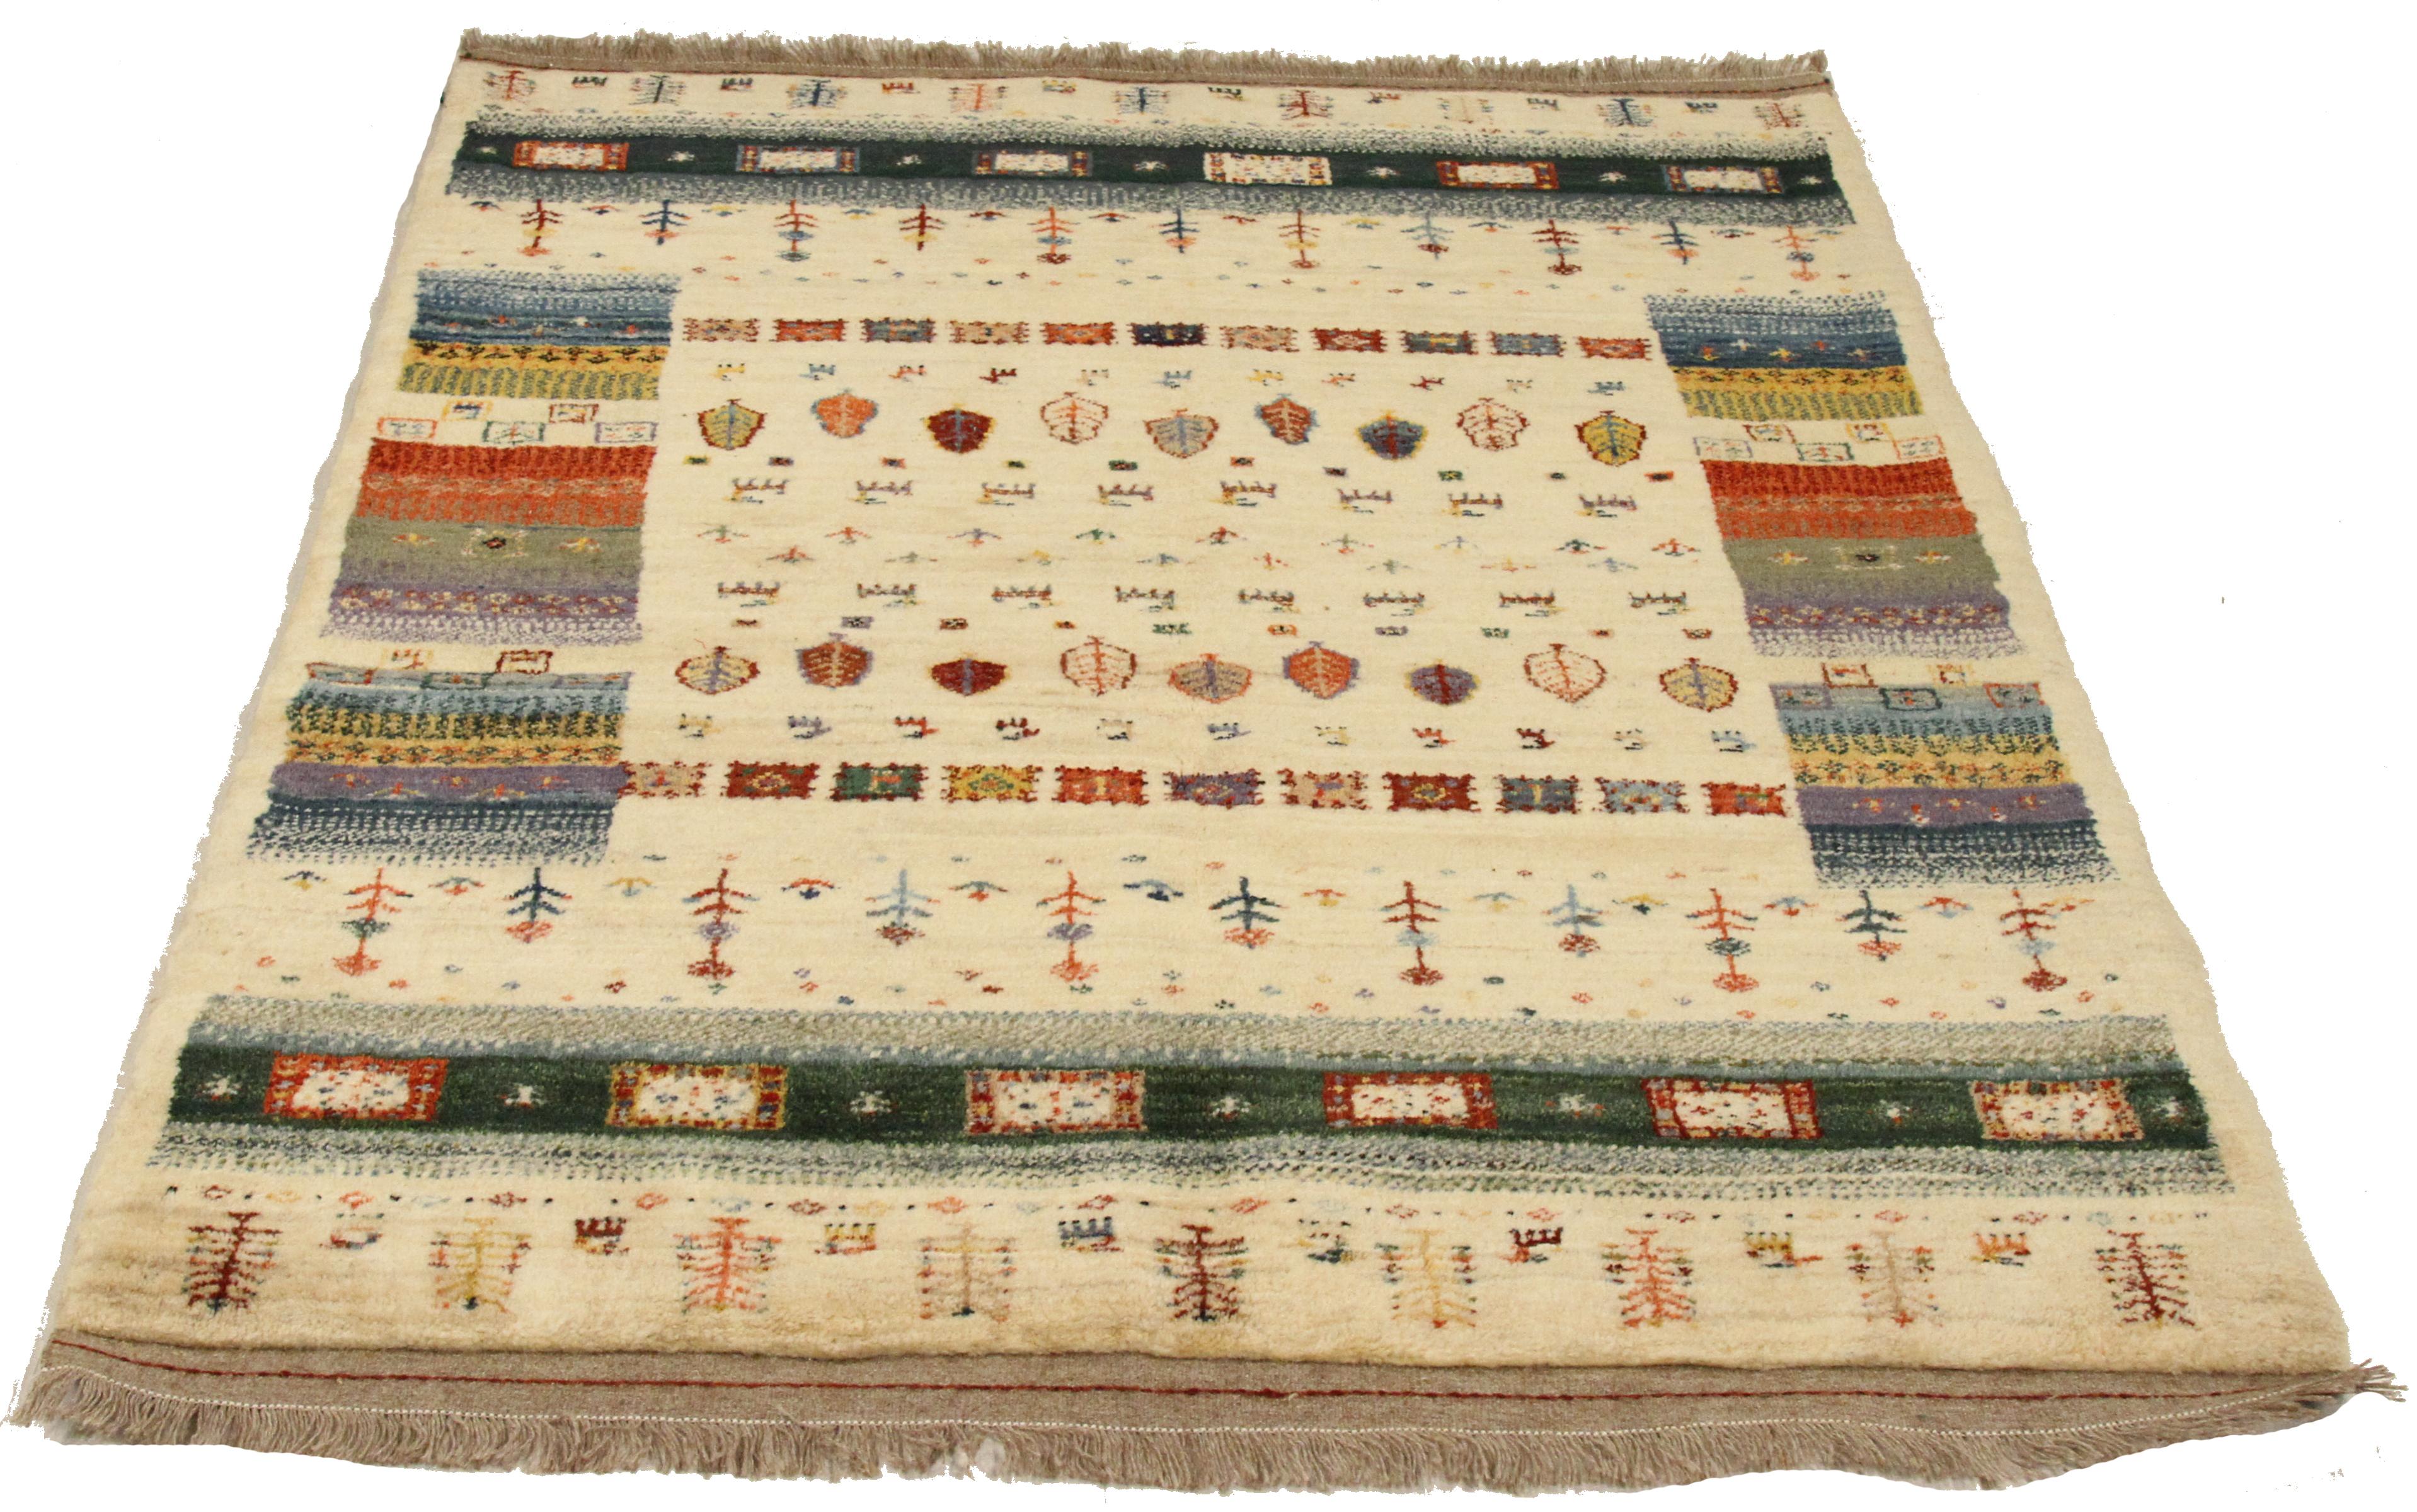 Vintage handwoven Persian rug made from fine wool and all-natural vegetable dyes that are safe for people and pets. This beautiful piece features simple geometric patterns which Gabbeh rugs are known for. Persian tribal rugs like Gabbeh are highly